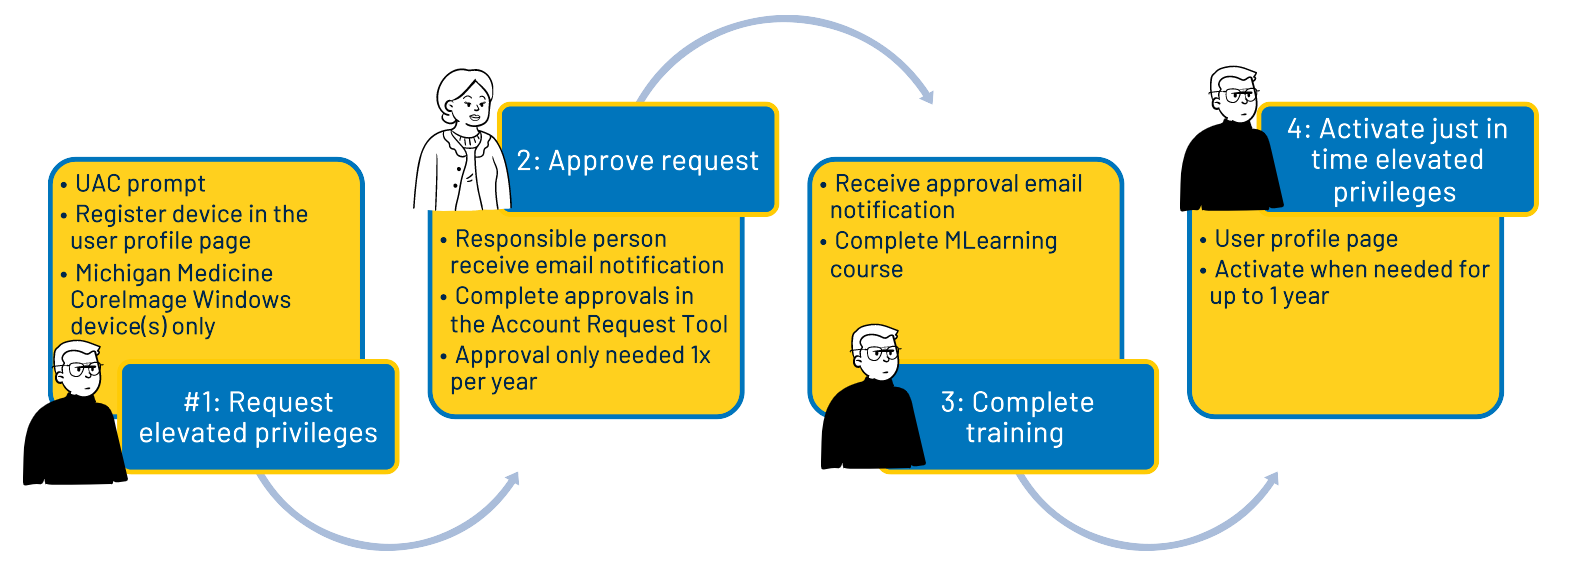 Image shows each step in the process for requesting and activating Privileged Acces. Clicking the image will take you to a knowledge article with fully written steps.